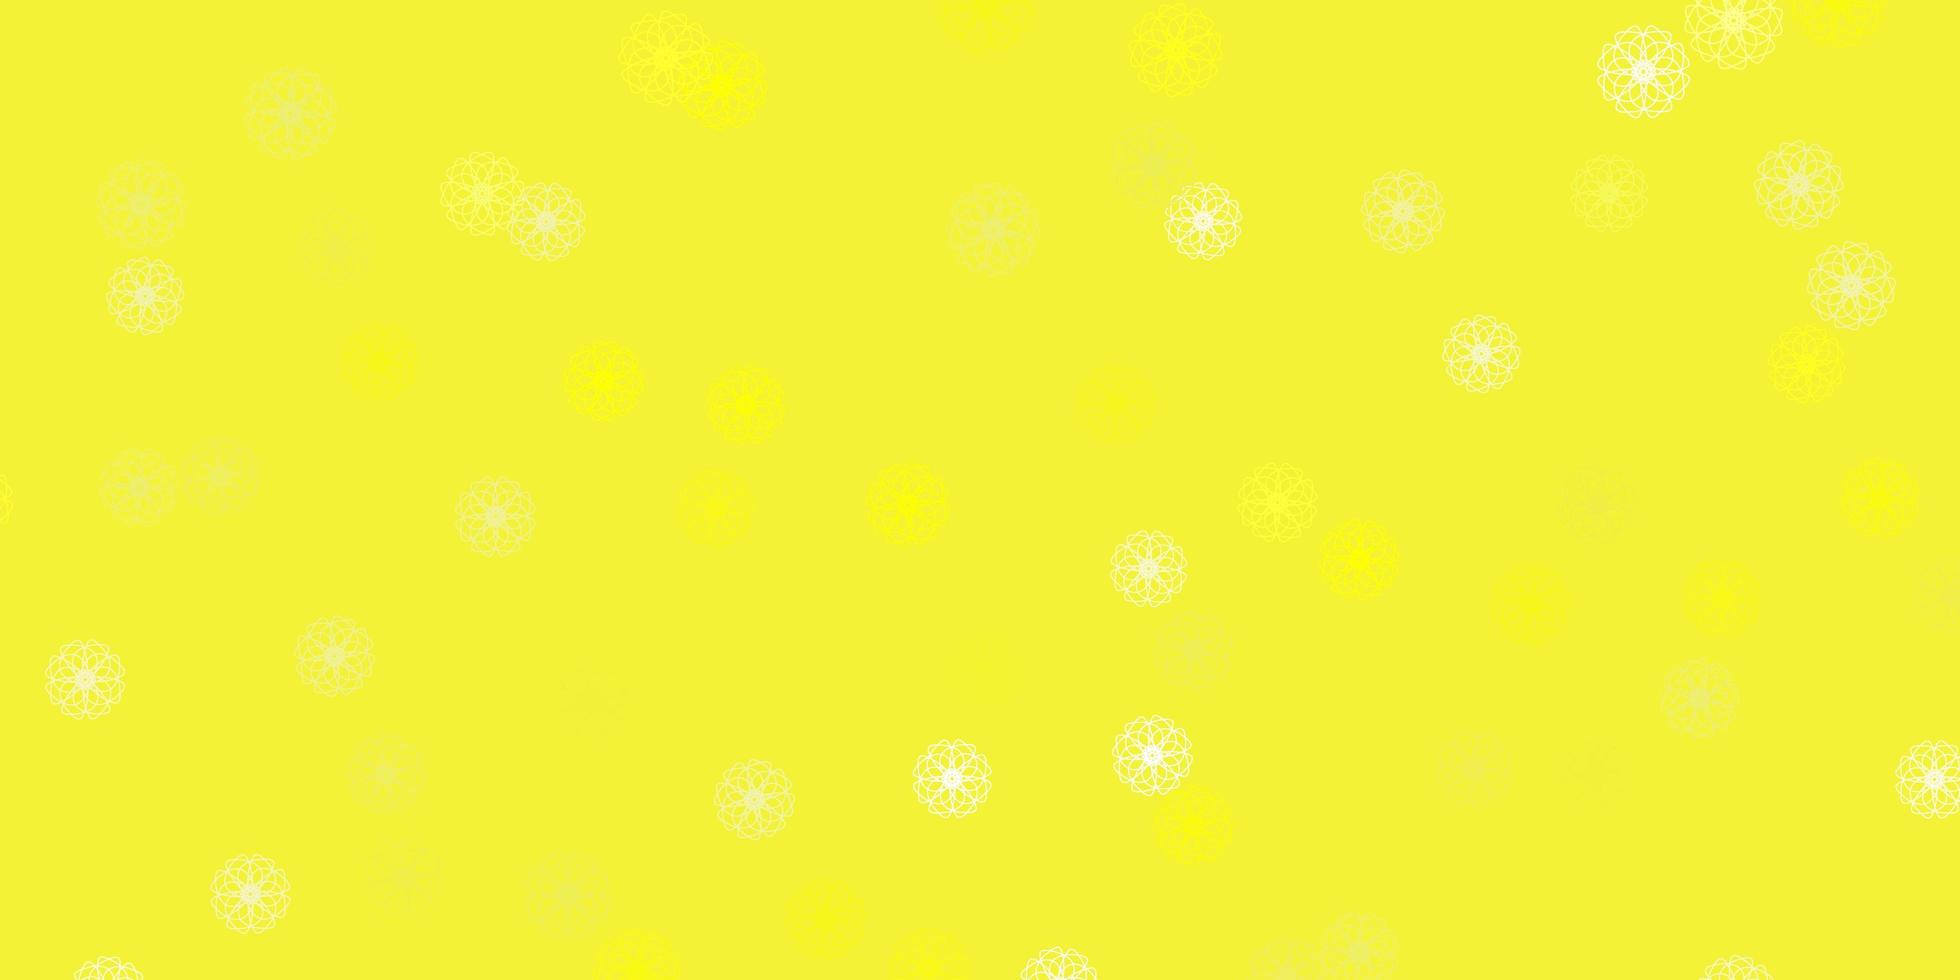 Light yellow vector natural layout with flowers.